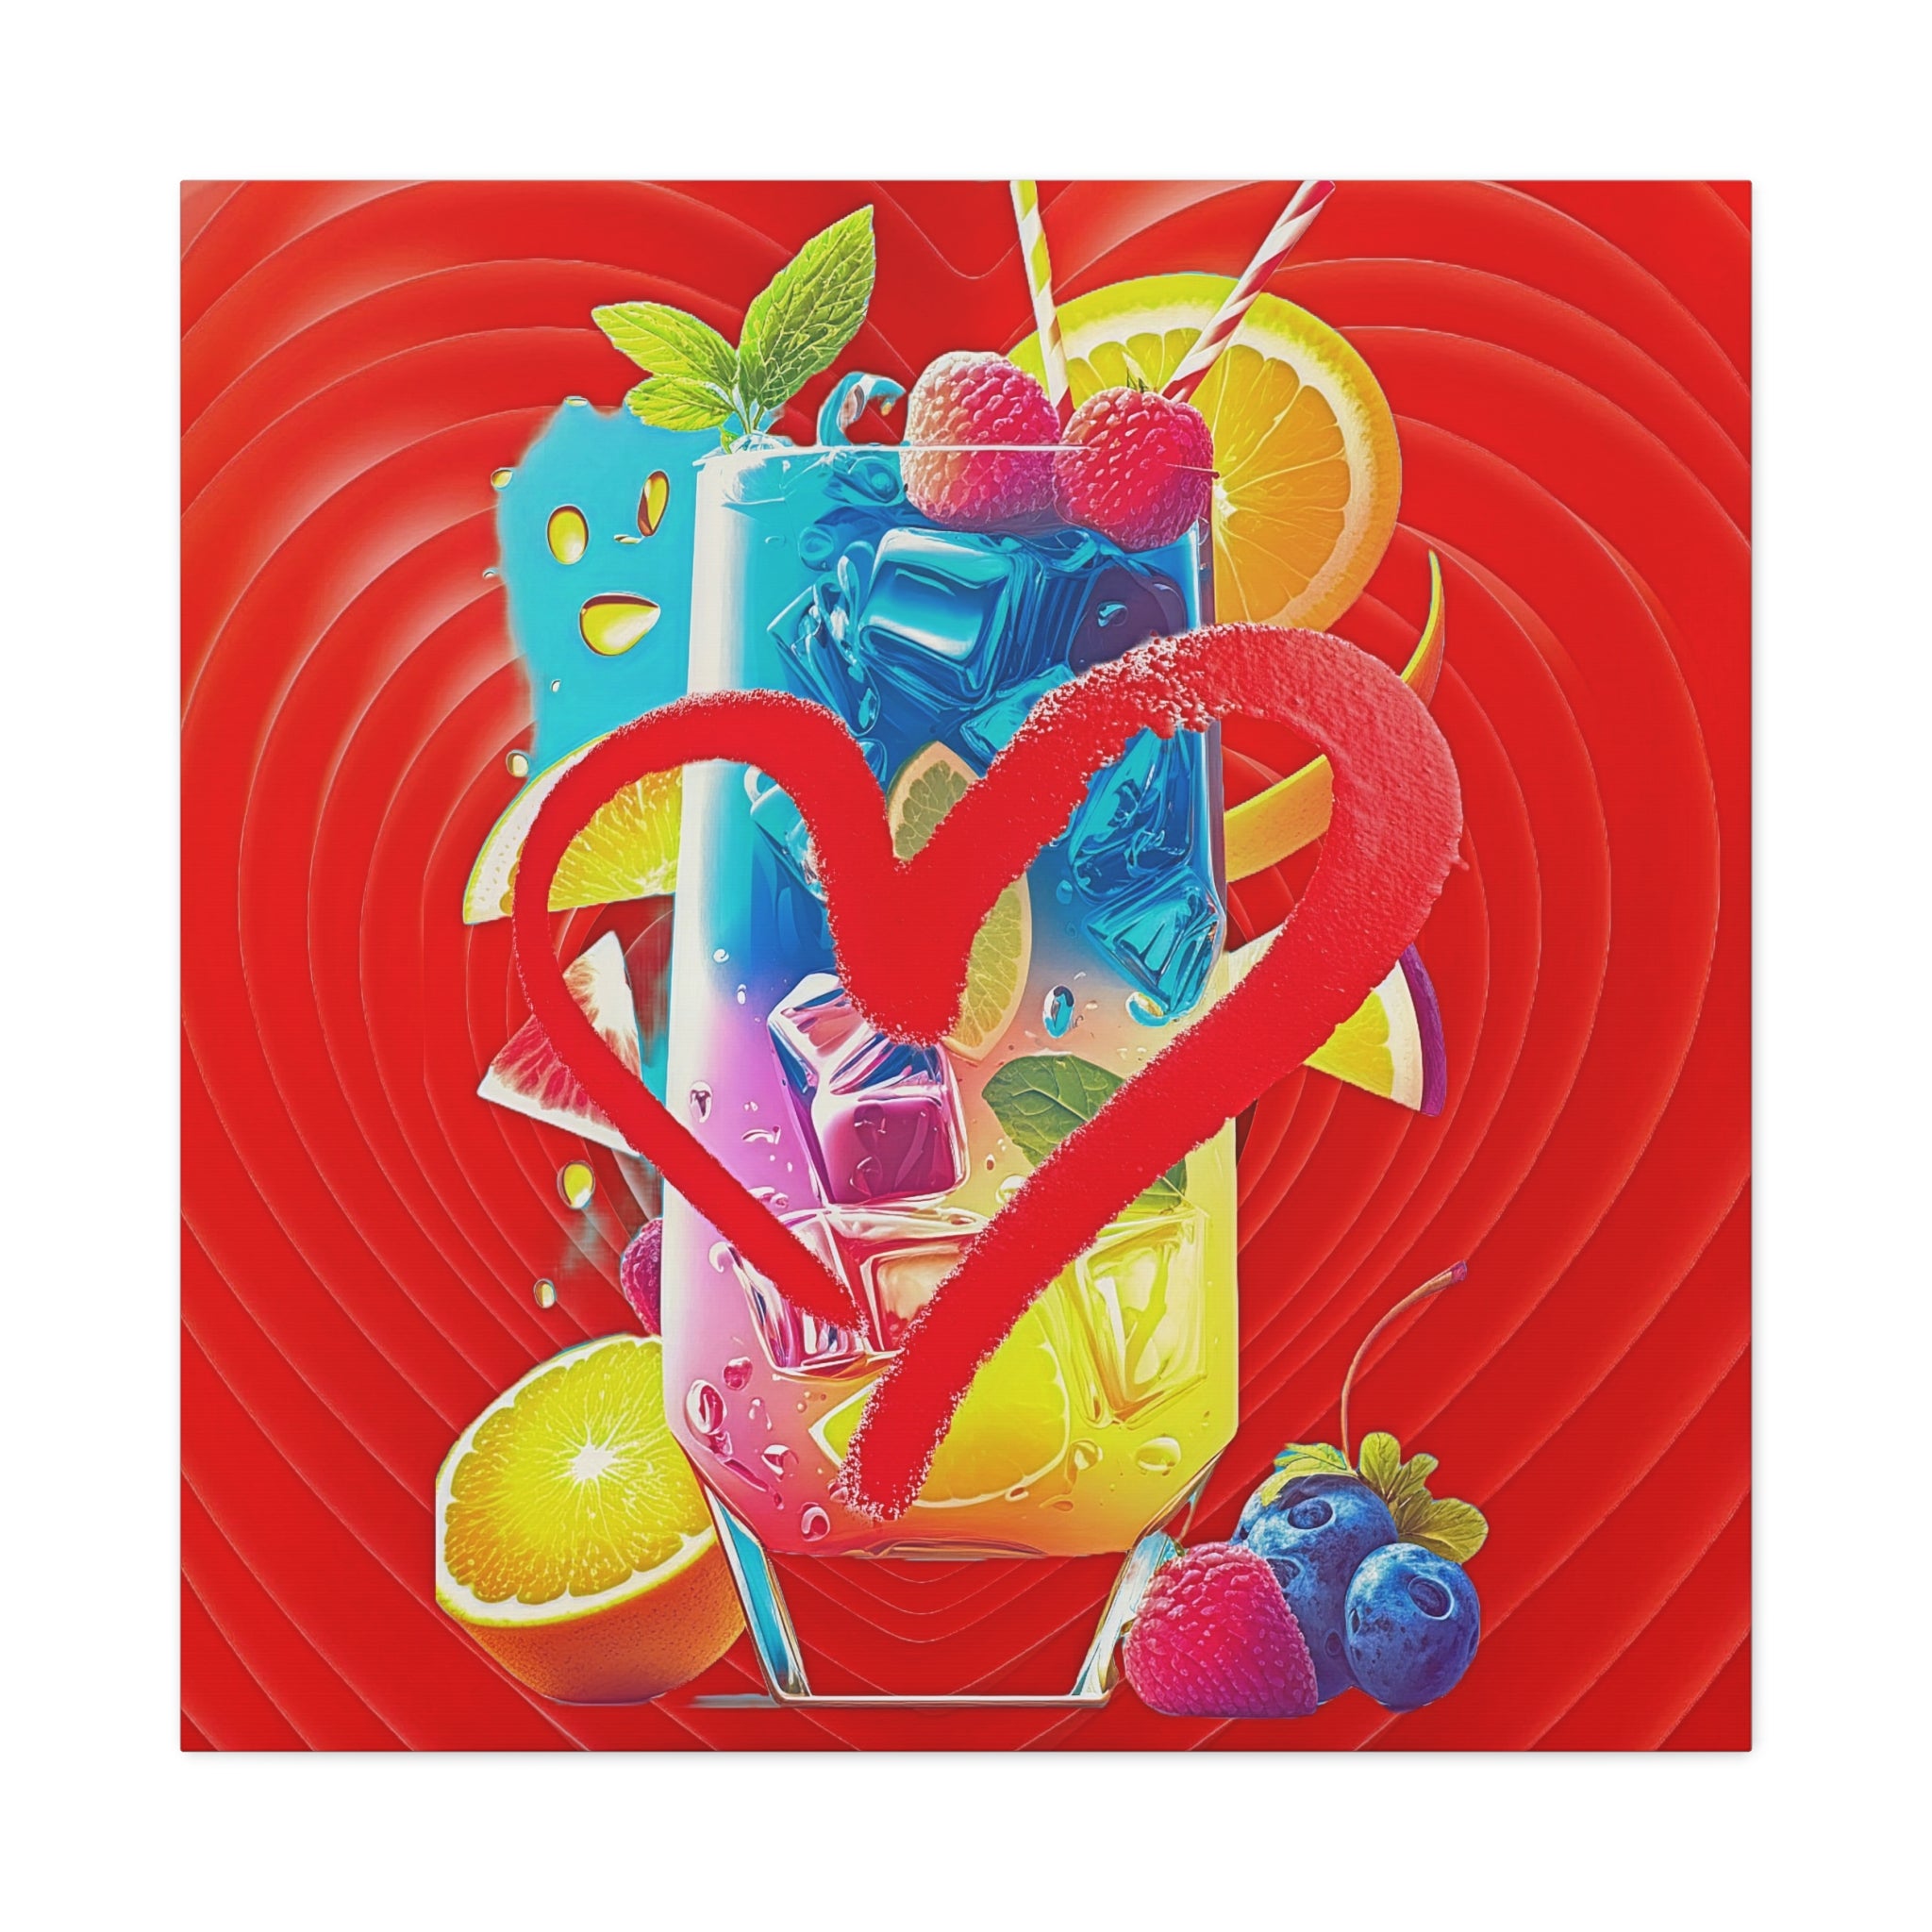 Wall Art LOVE LEMONADE Canvas Print Painting Original Giclee 40X30 GW Nice Beauty Food, Wine & Drinks Design Fit Red Hot House Home Living Office Gift Ready to Hang